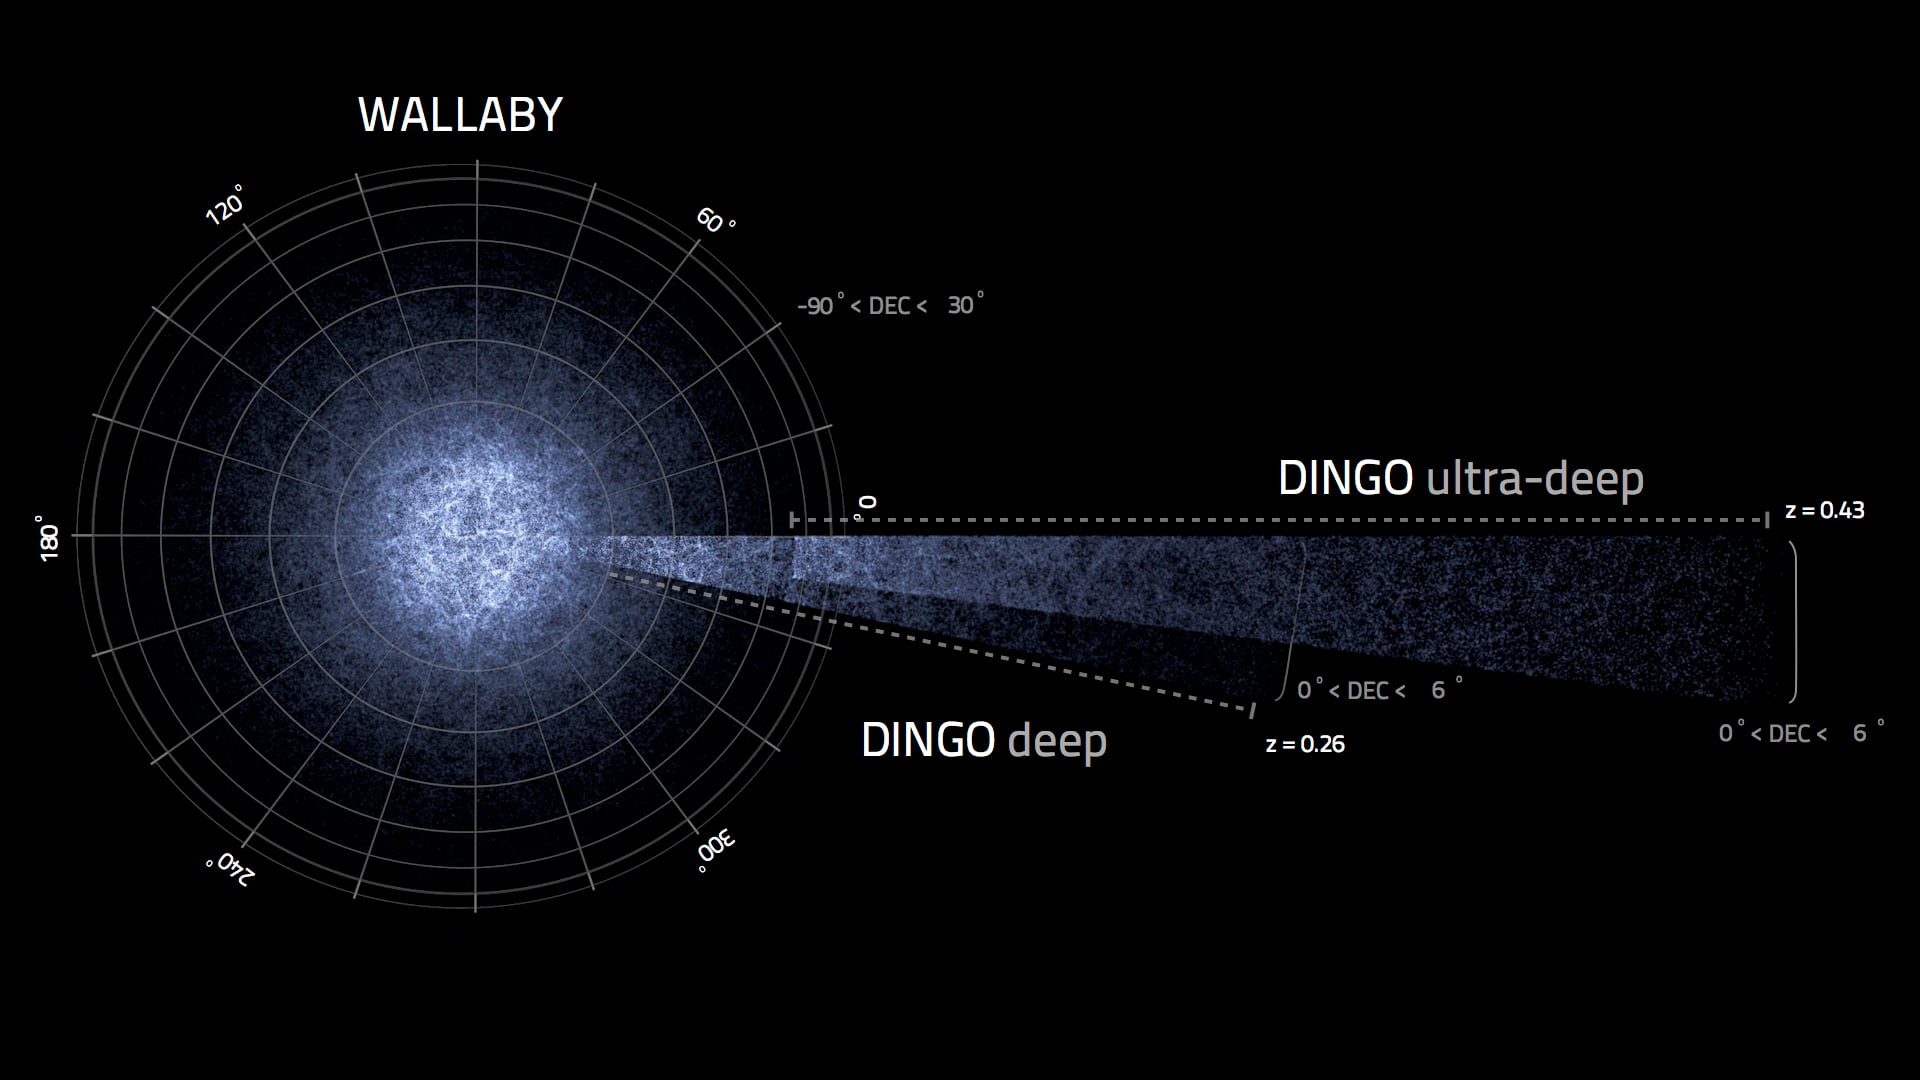 The simulated galaxies ASKAP surveys WALLABY and DINGO are predicted to find. WALLABY will survey a large portion of the sky and DINGO will survey a smaller section but in much greater detail.